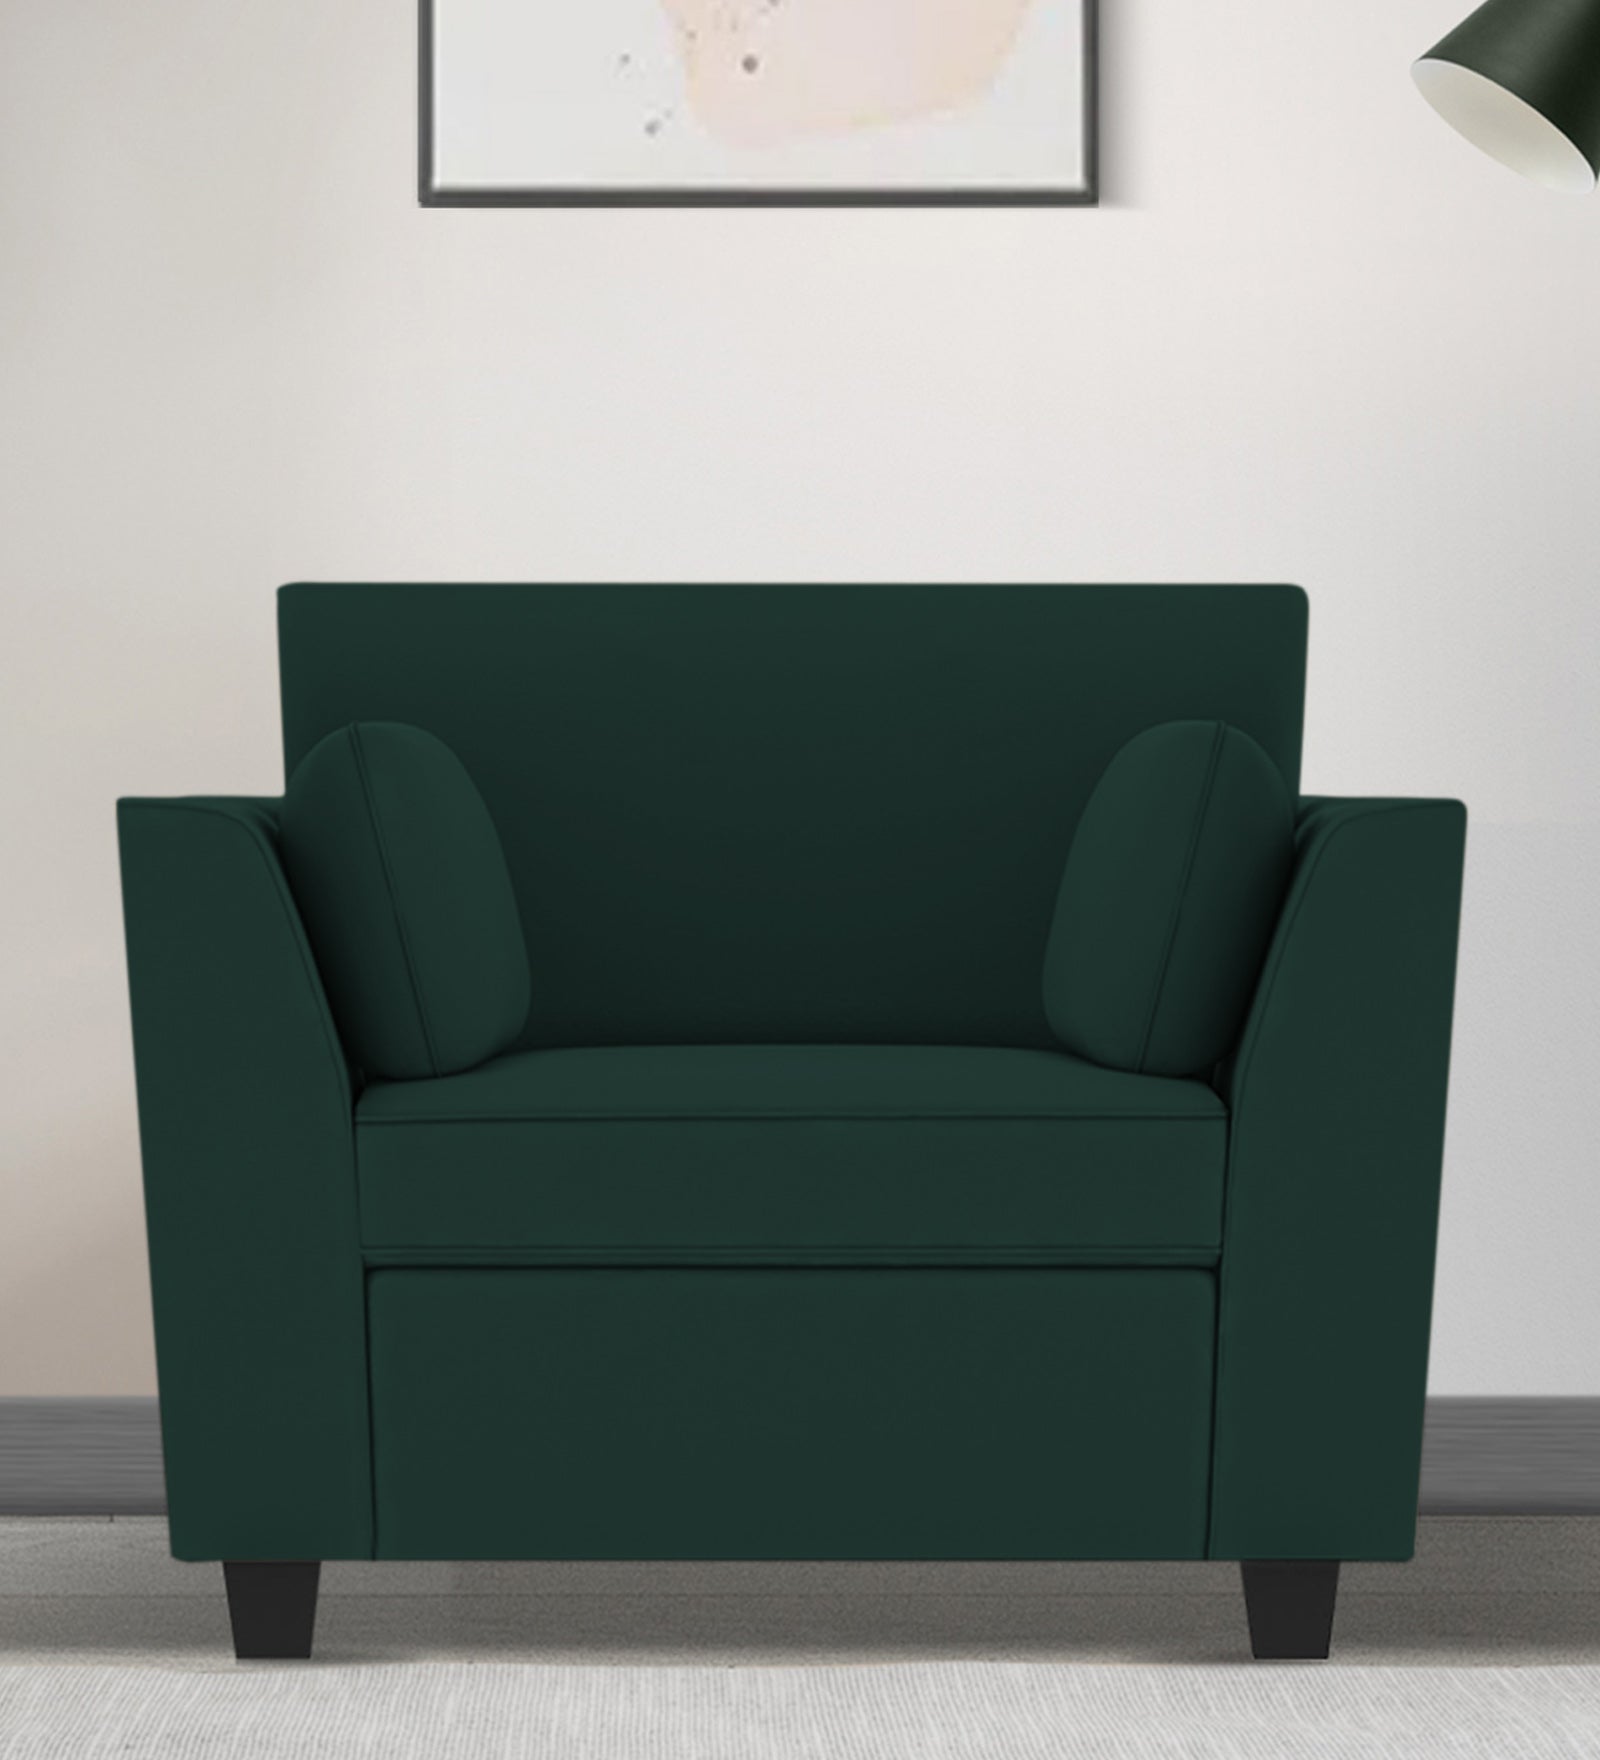 Bristo Velvet 1 Seater Sofa in Forest Green Colour With Storage